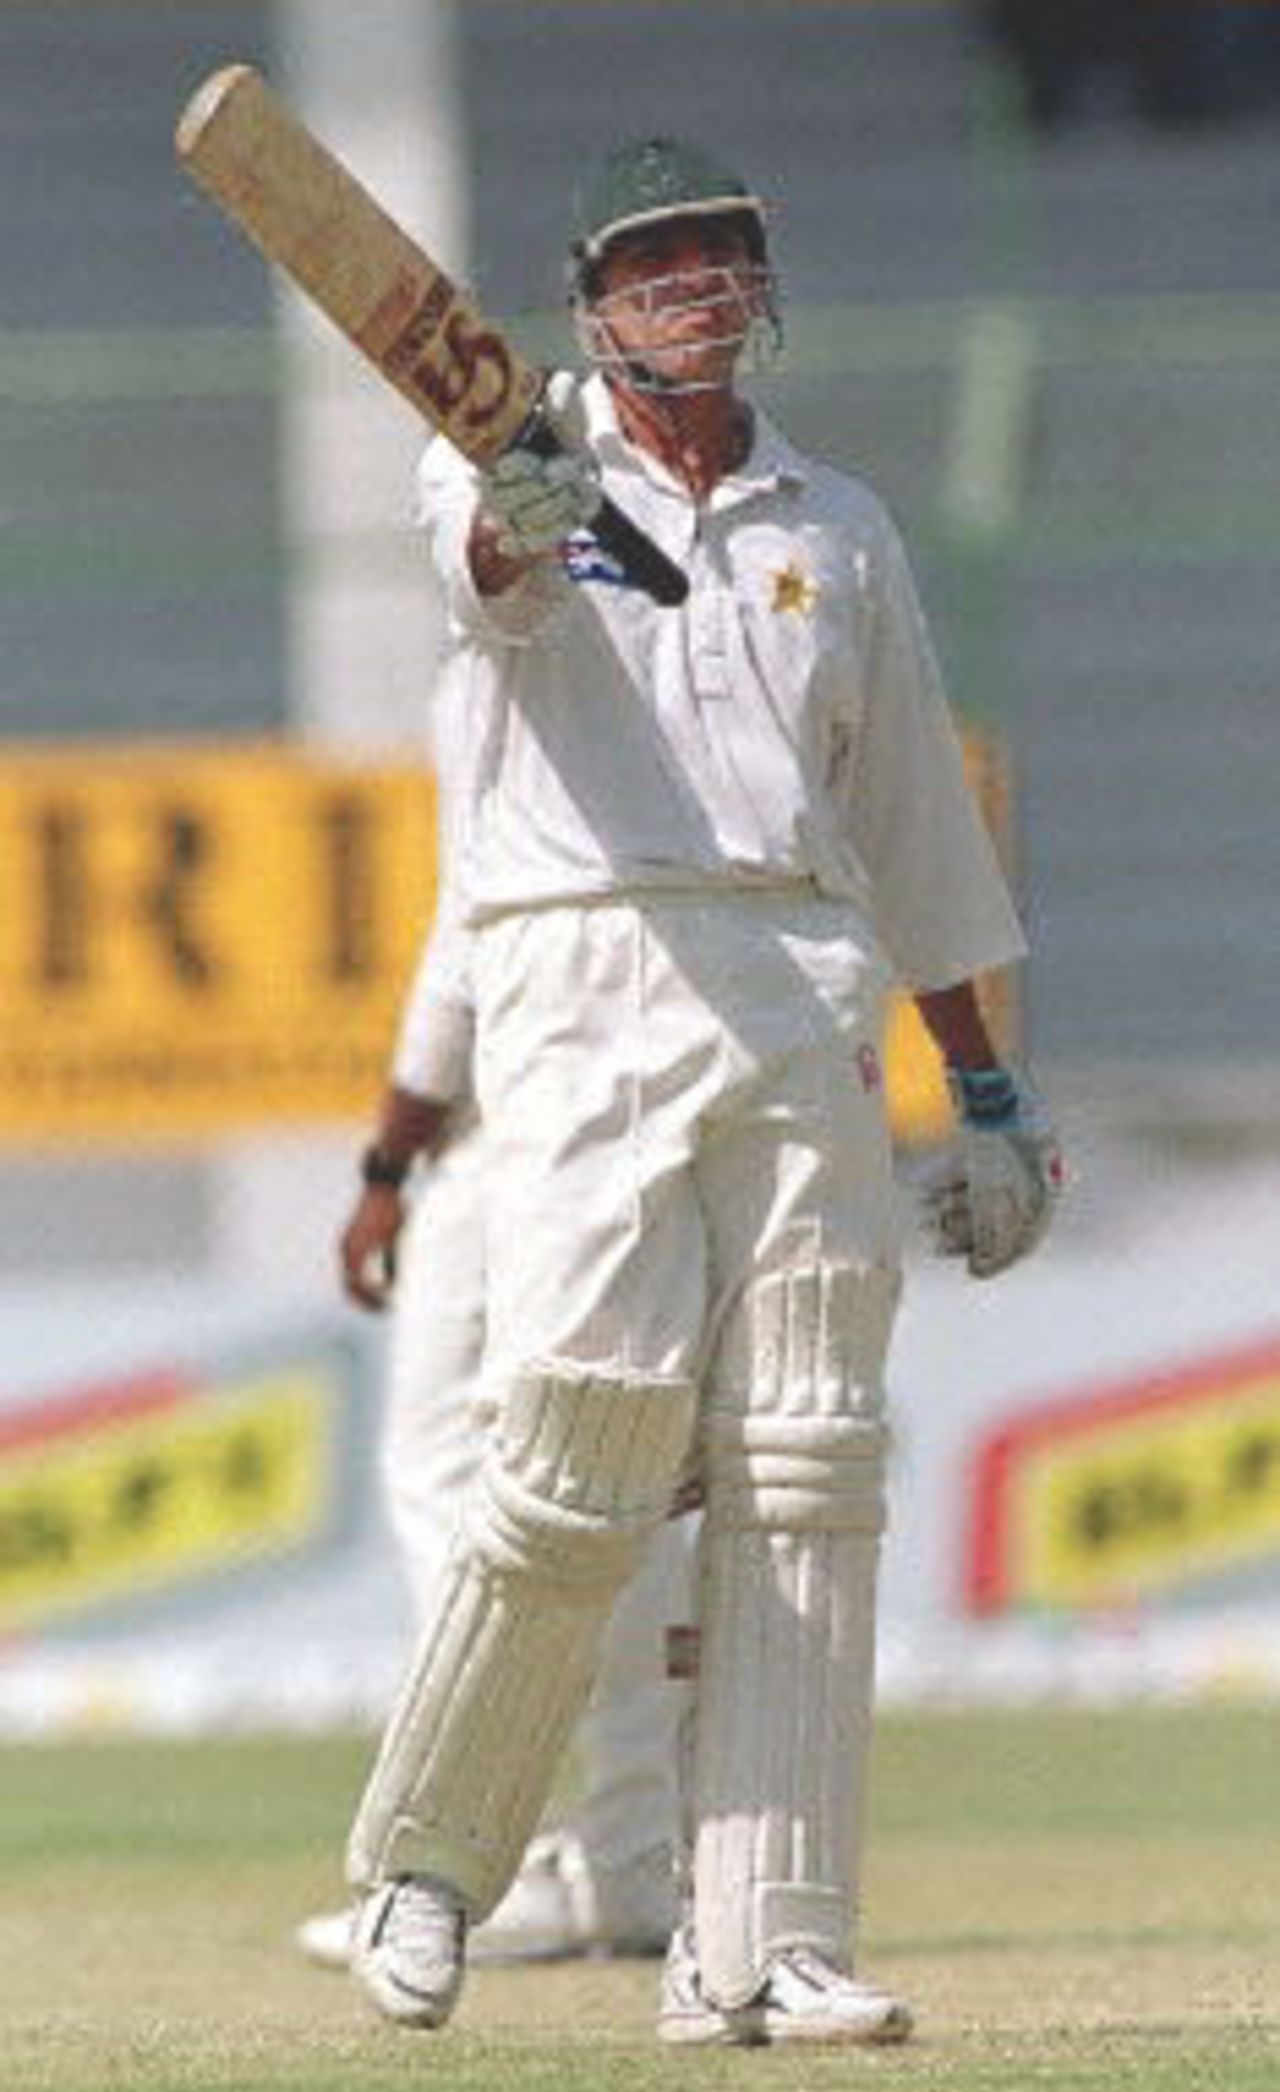 Pakistani middle order batsman Younis Khan waves his bat in jubilation as he reached fifty on the third day of the third and last cricket Test in Karachi, 14 March 2000. Khan, who scored a debut century in his first Test against Sri Lanka, made 61 runs in Pakistan's second inning. At stumps Pakistan were 375-7 having overall lead of 404.